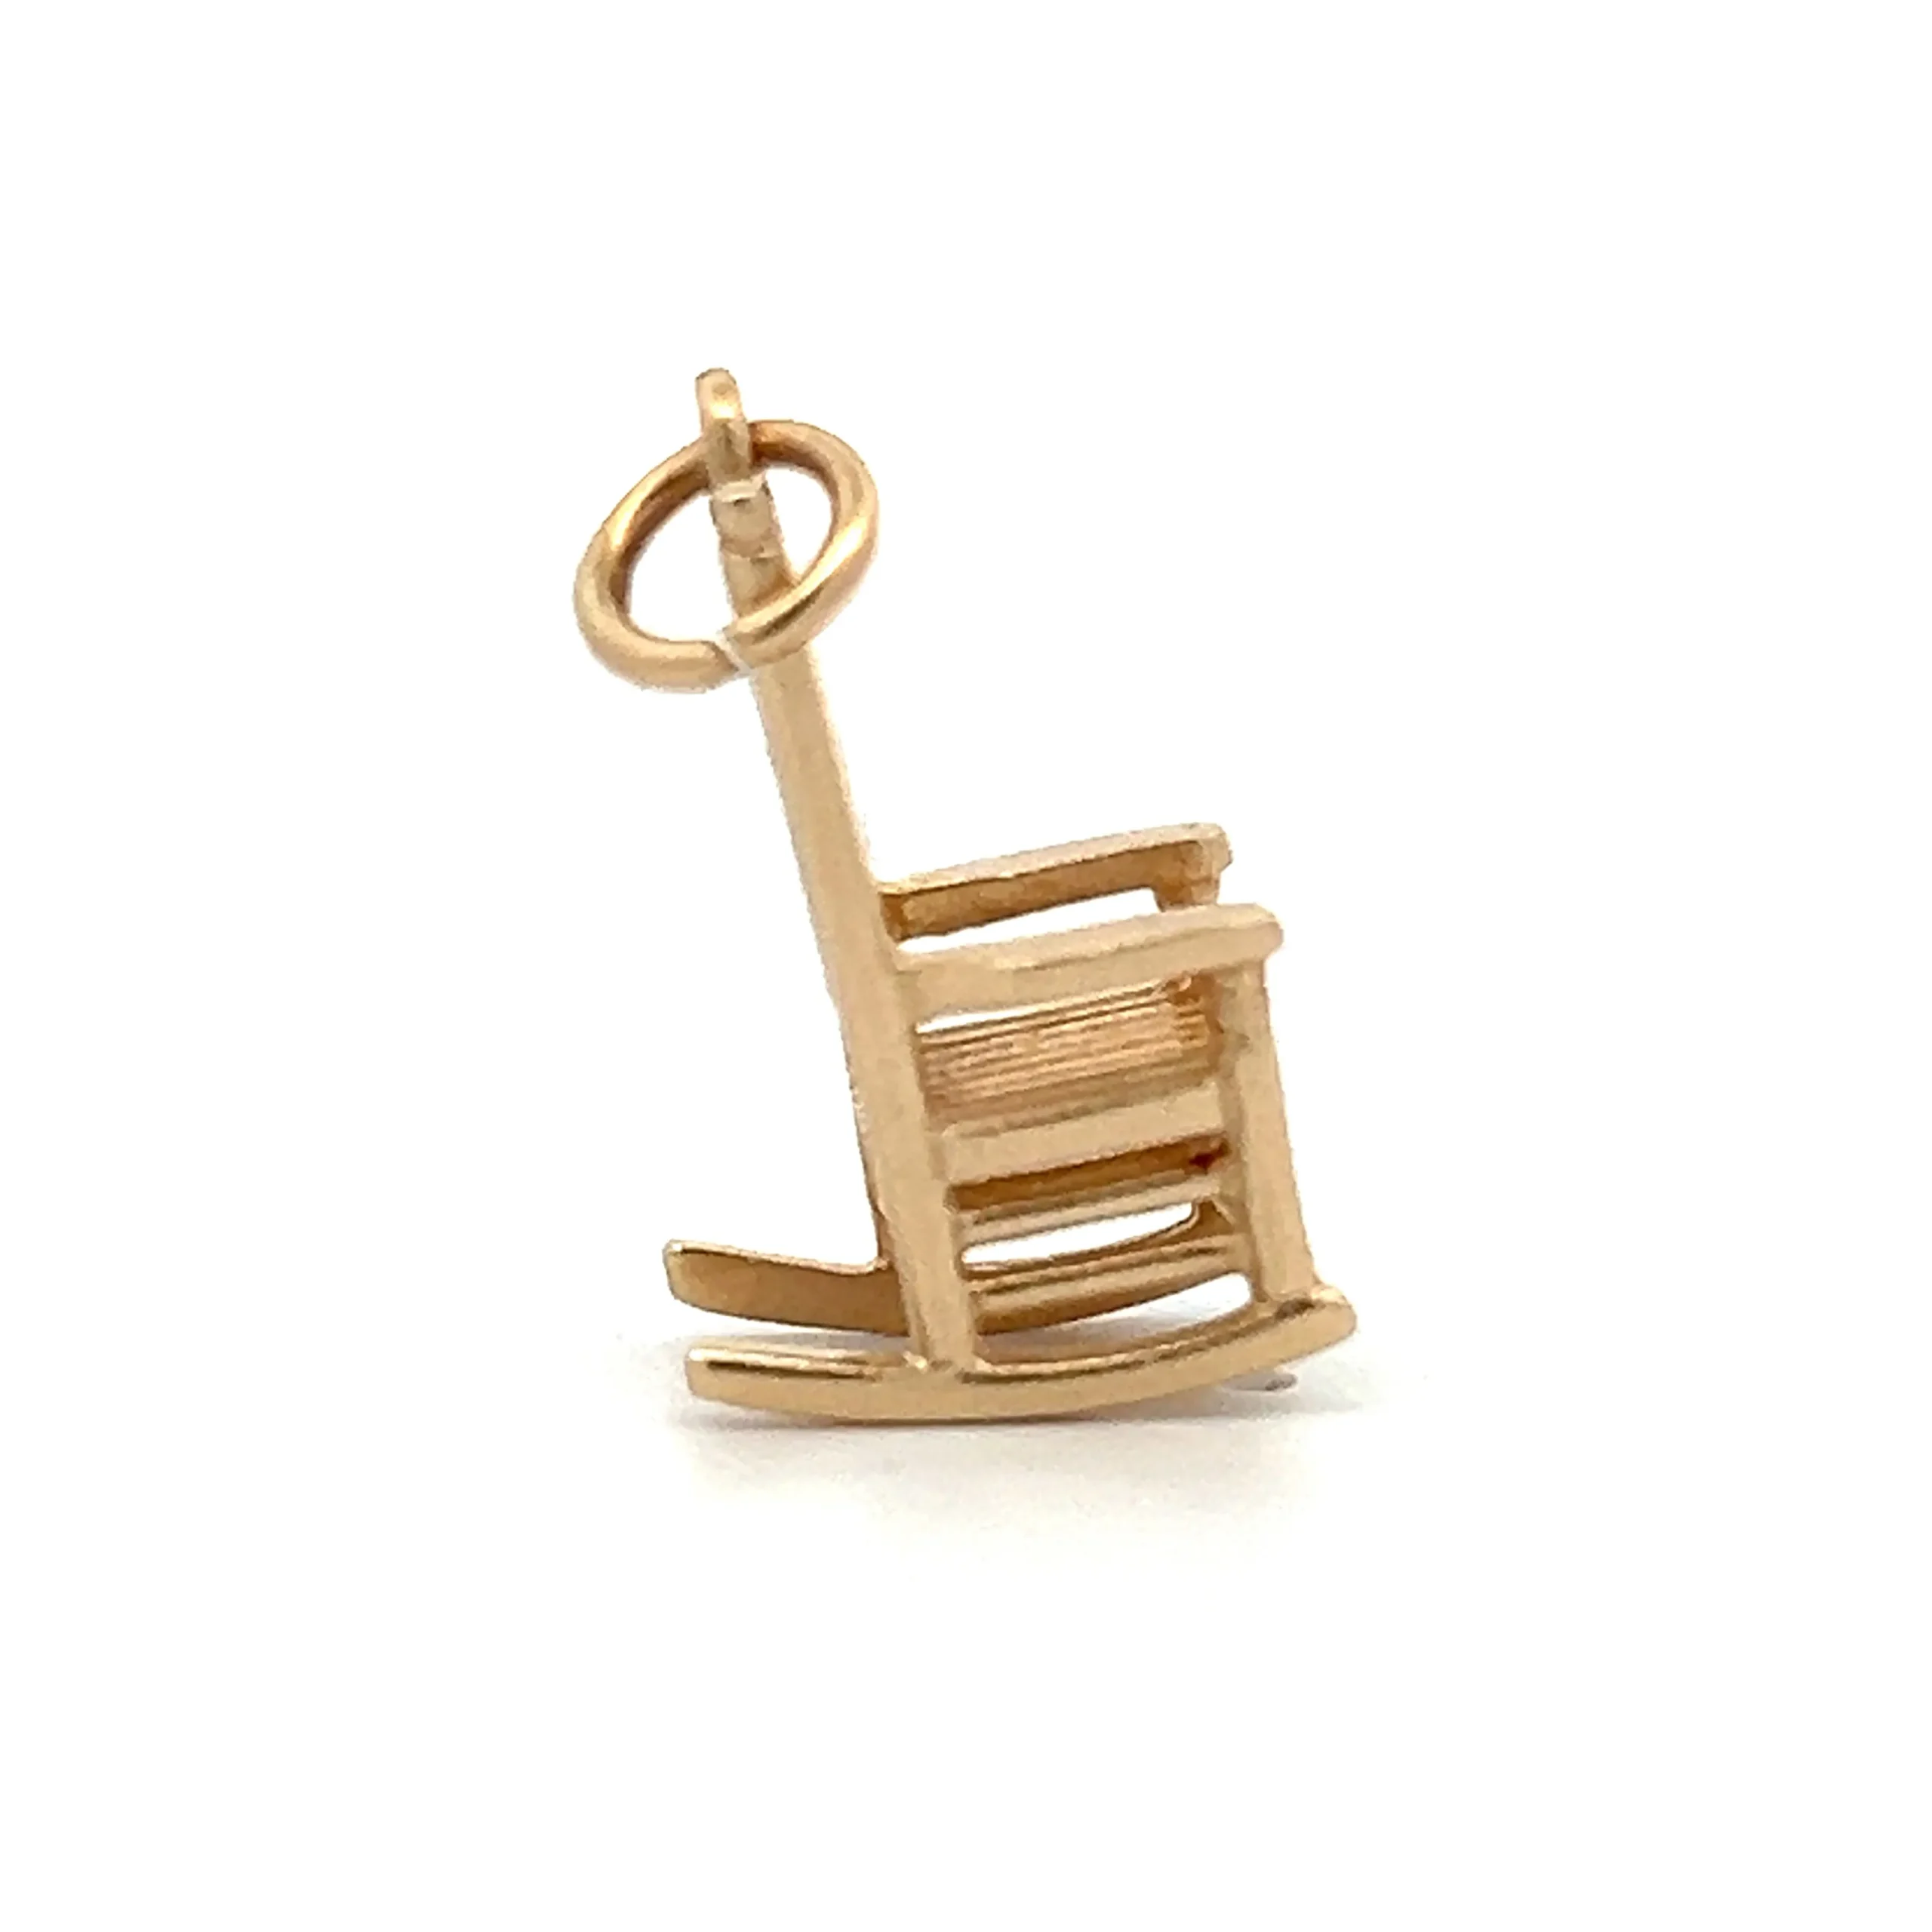 Estate 14K Yellow Gold Rocking Chair Charm - 0.81 x 0.34 inches, perfect for charm bracelets or necklaces.